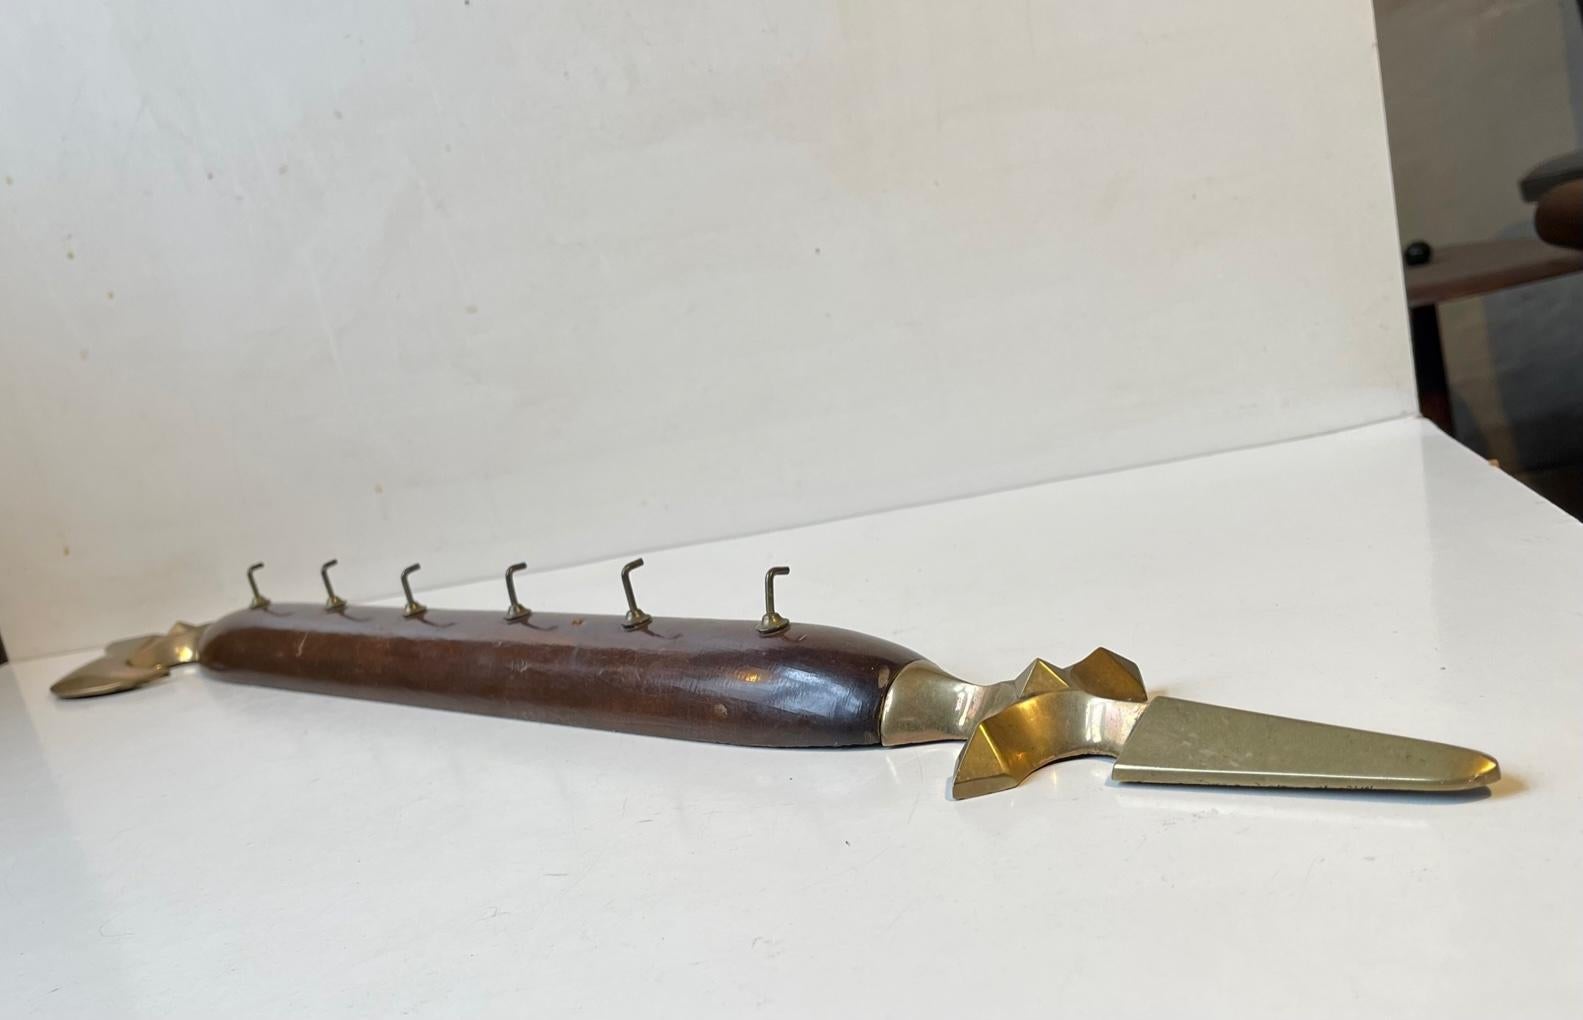 Decorative large key or dishtowel hanger in shape of an axe. It has 6 hooks and its made from brass and lacquered mahogany. A type not restricted by cites. It was made circa 1900-1920, probably to a Rotary or Mason's association. Measurements: L/W: